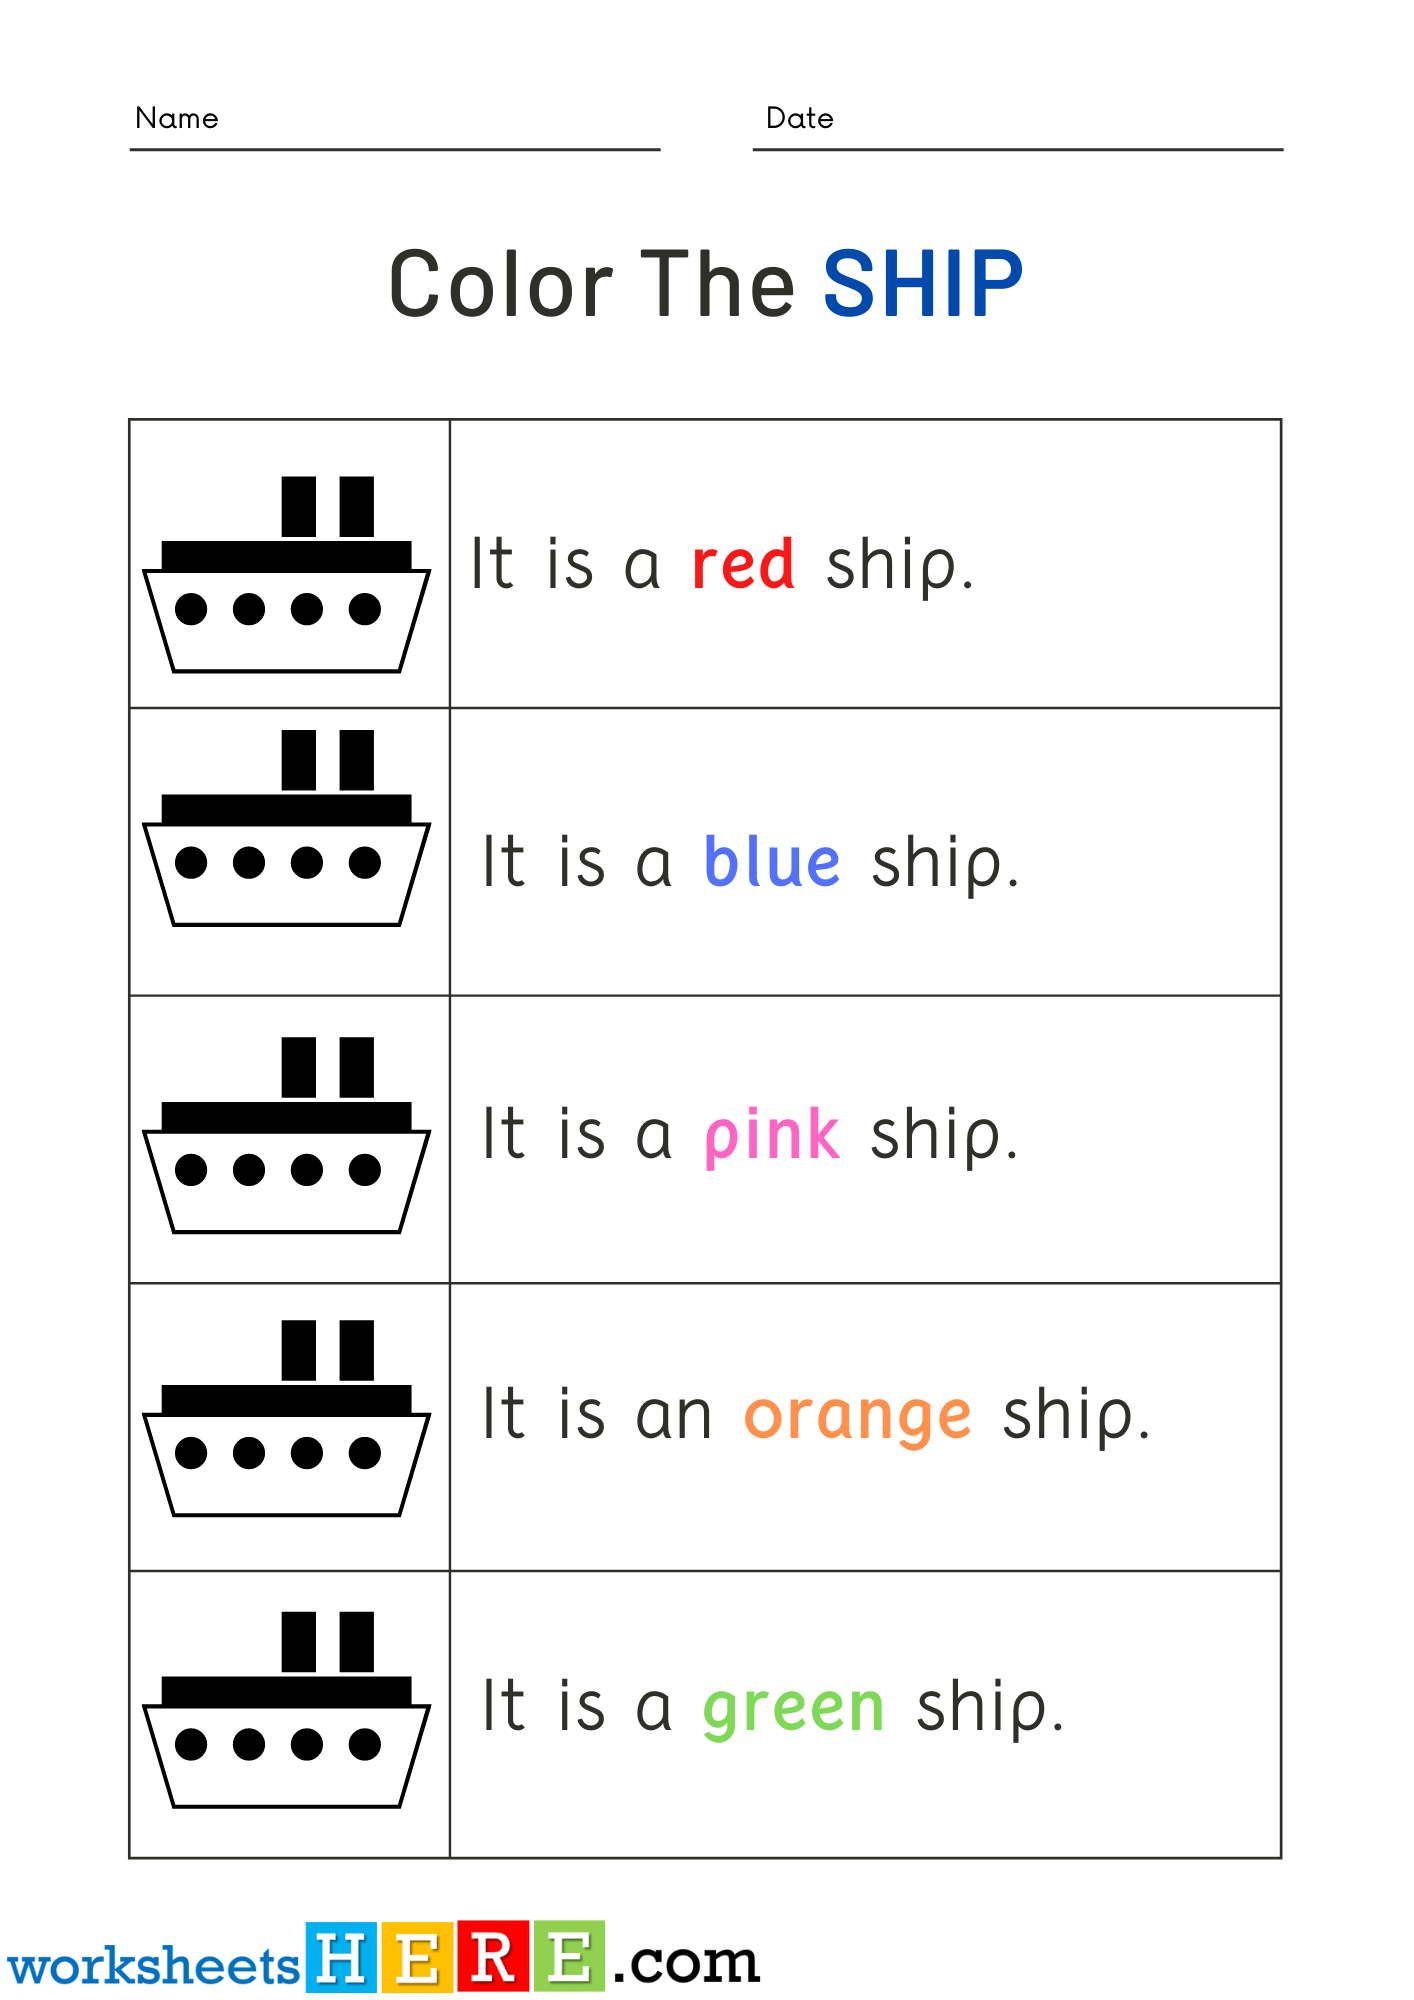 Read Words and Color Ship Pictures Activity PDF Worksheets For Kindergarten